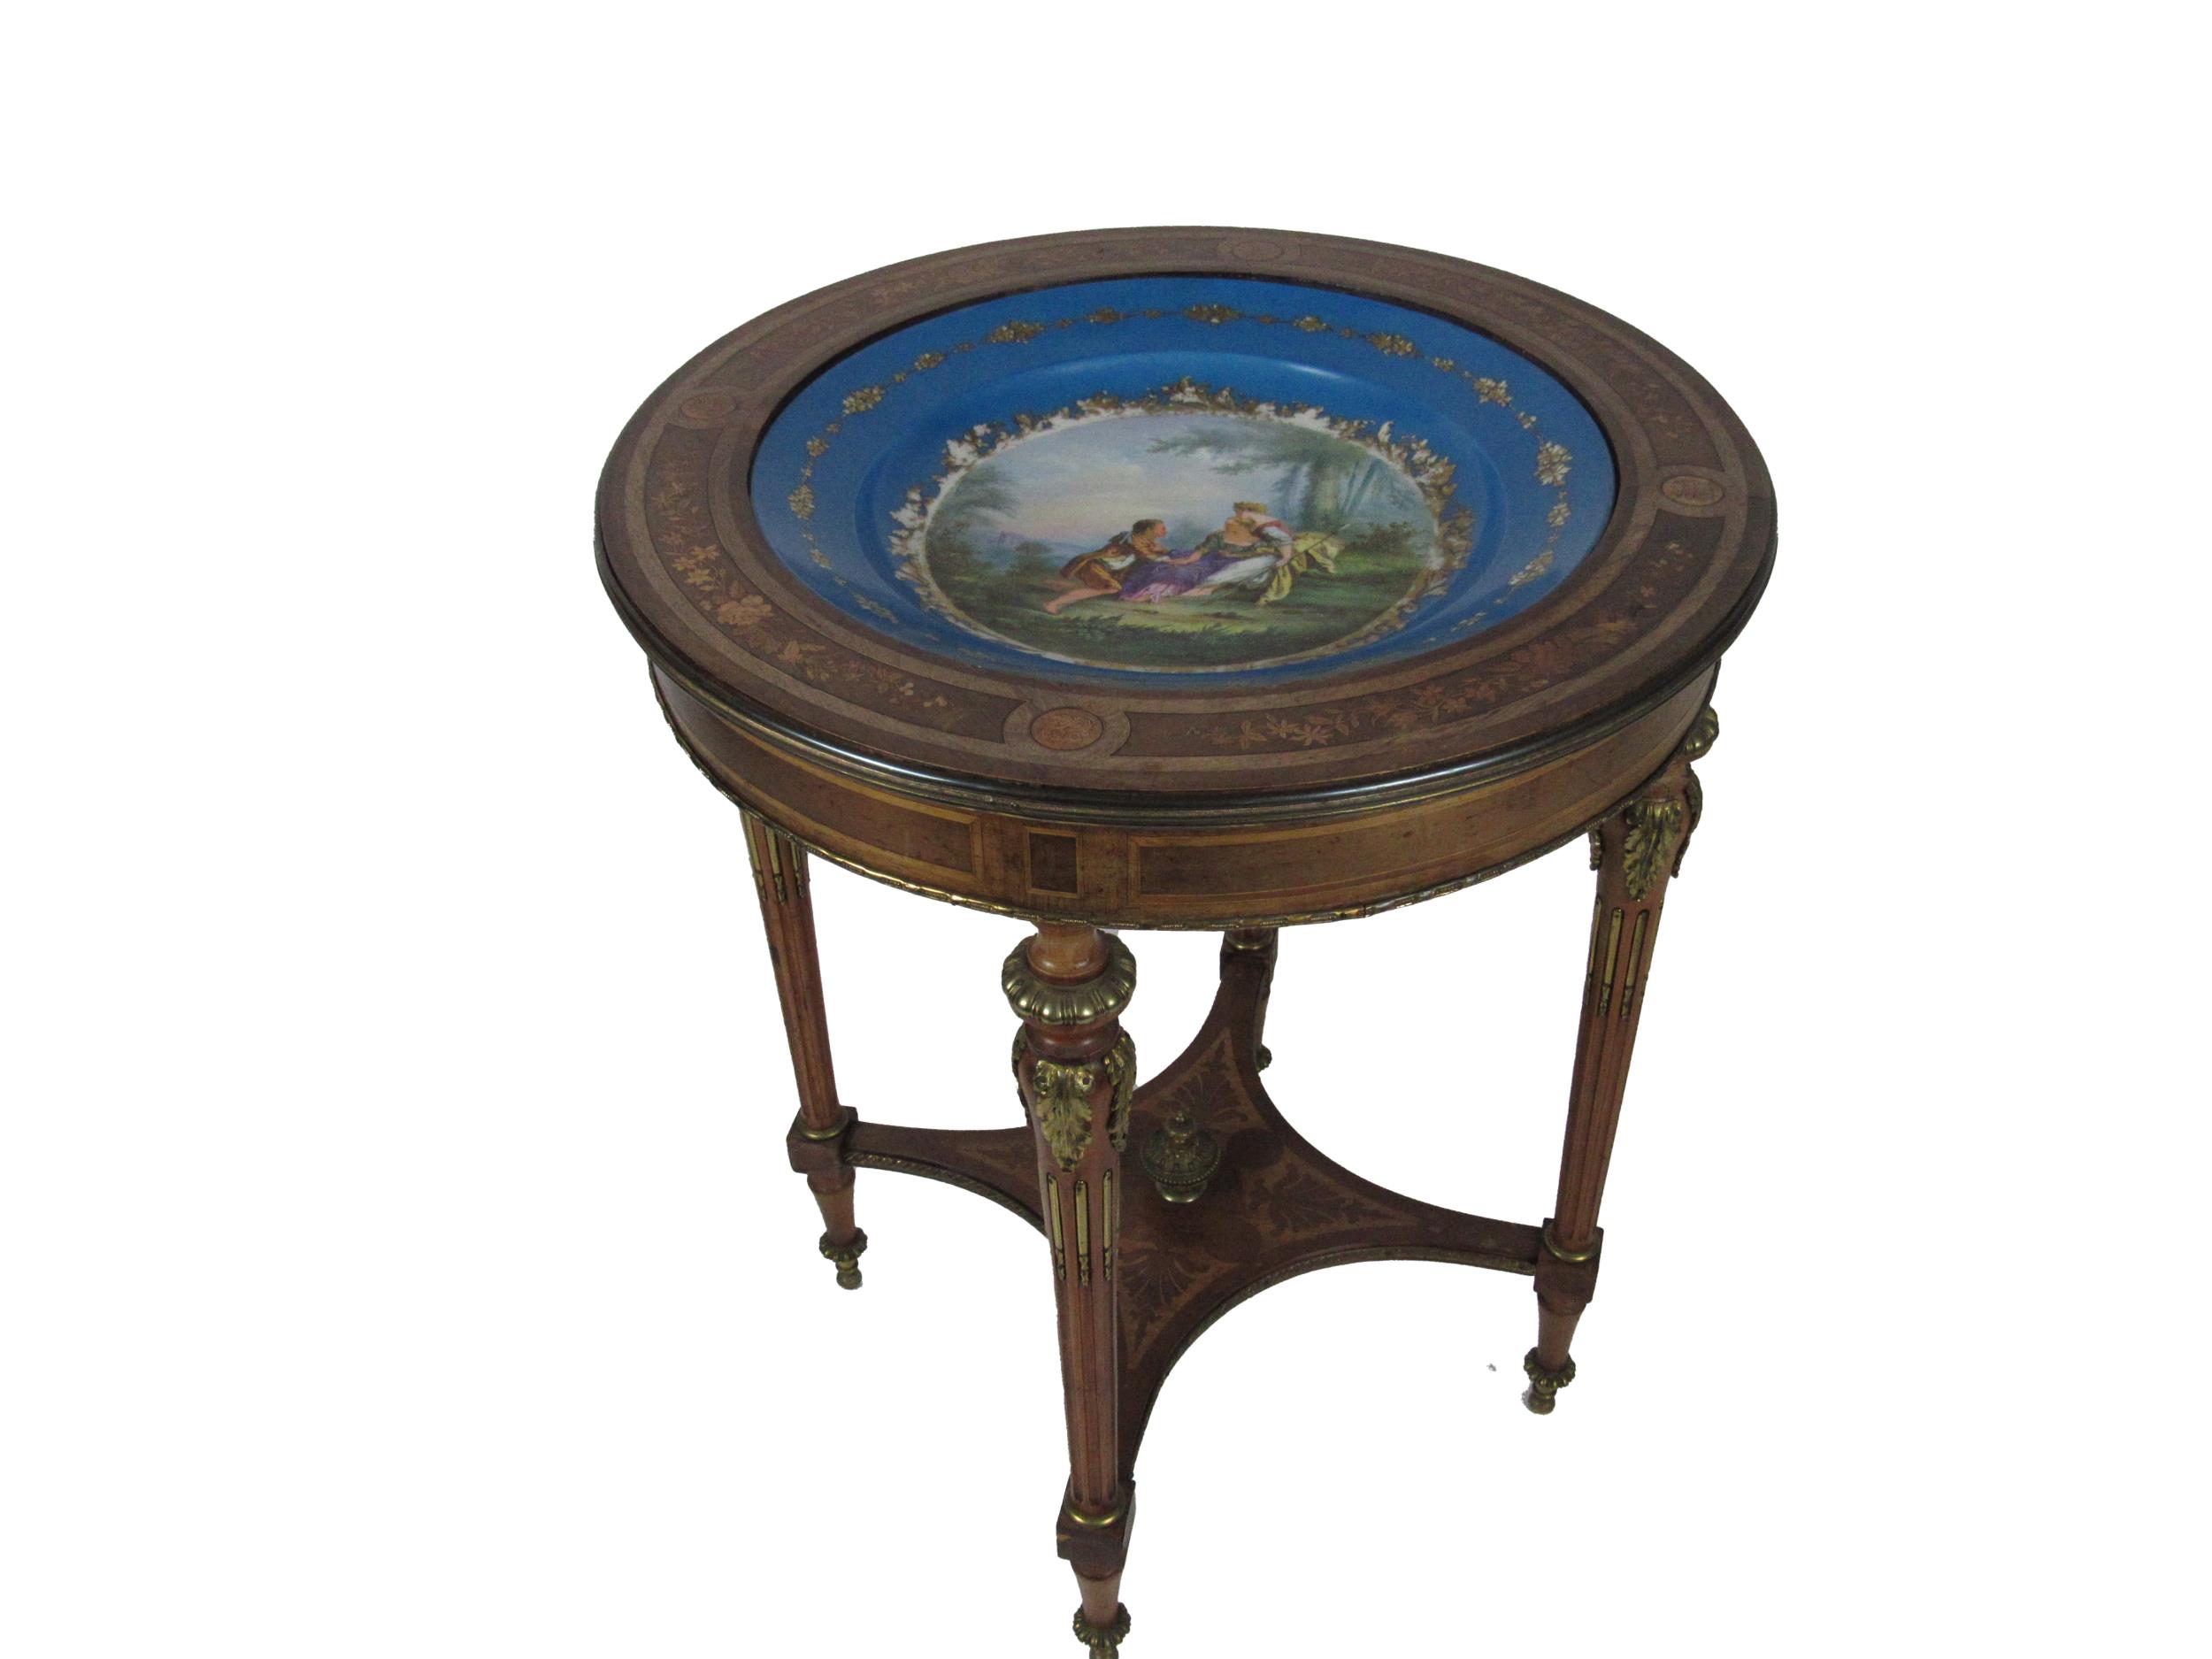 An attractive French Louis XVI style circular Table, the top inset with Sevres type decorated bowl